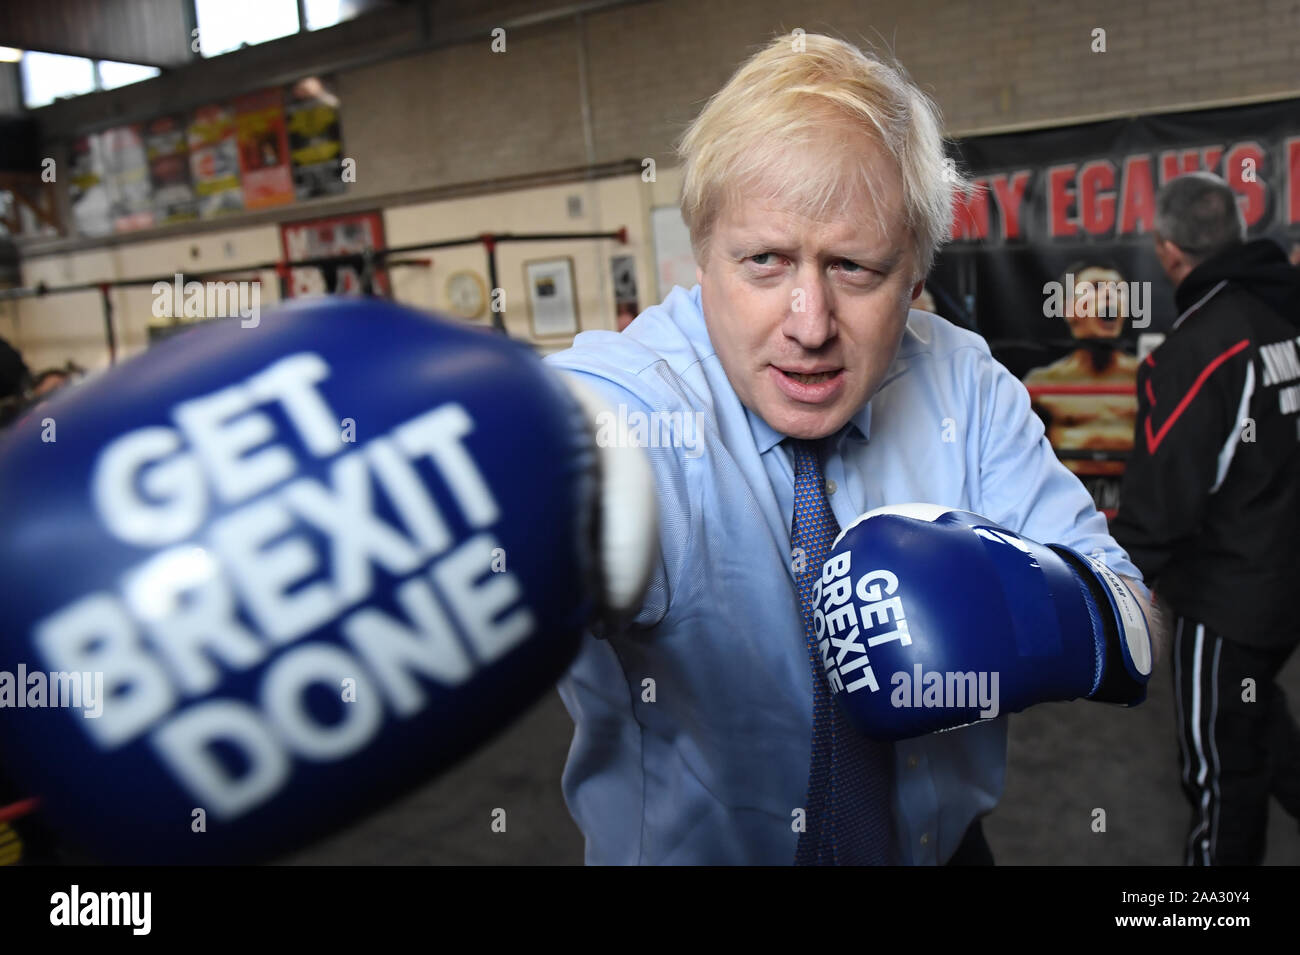 Prime Minister Boris Johnson during a visit to Jimmy Egan's Boxing Academy at Wythenshawe, while on the campaign trail ahead of the General Election. Stock Photo